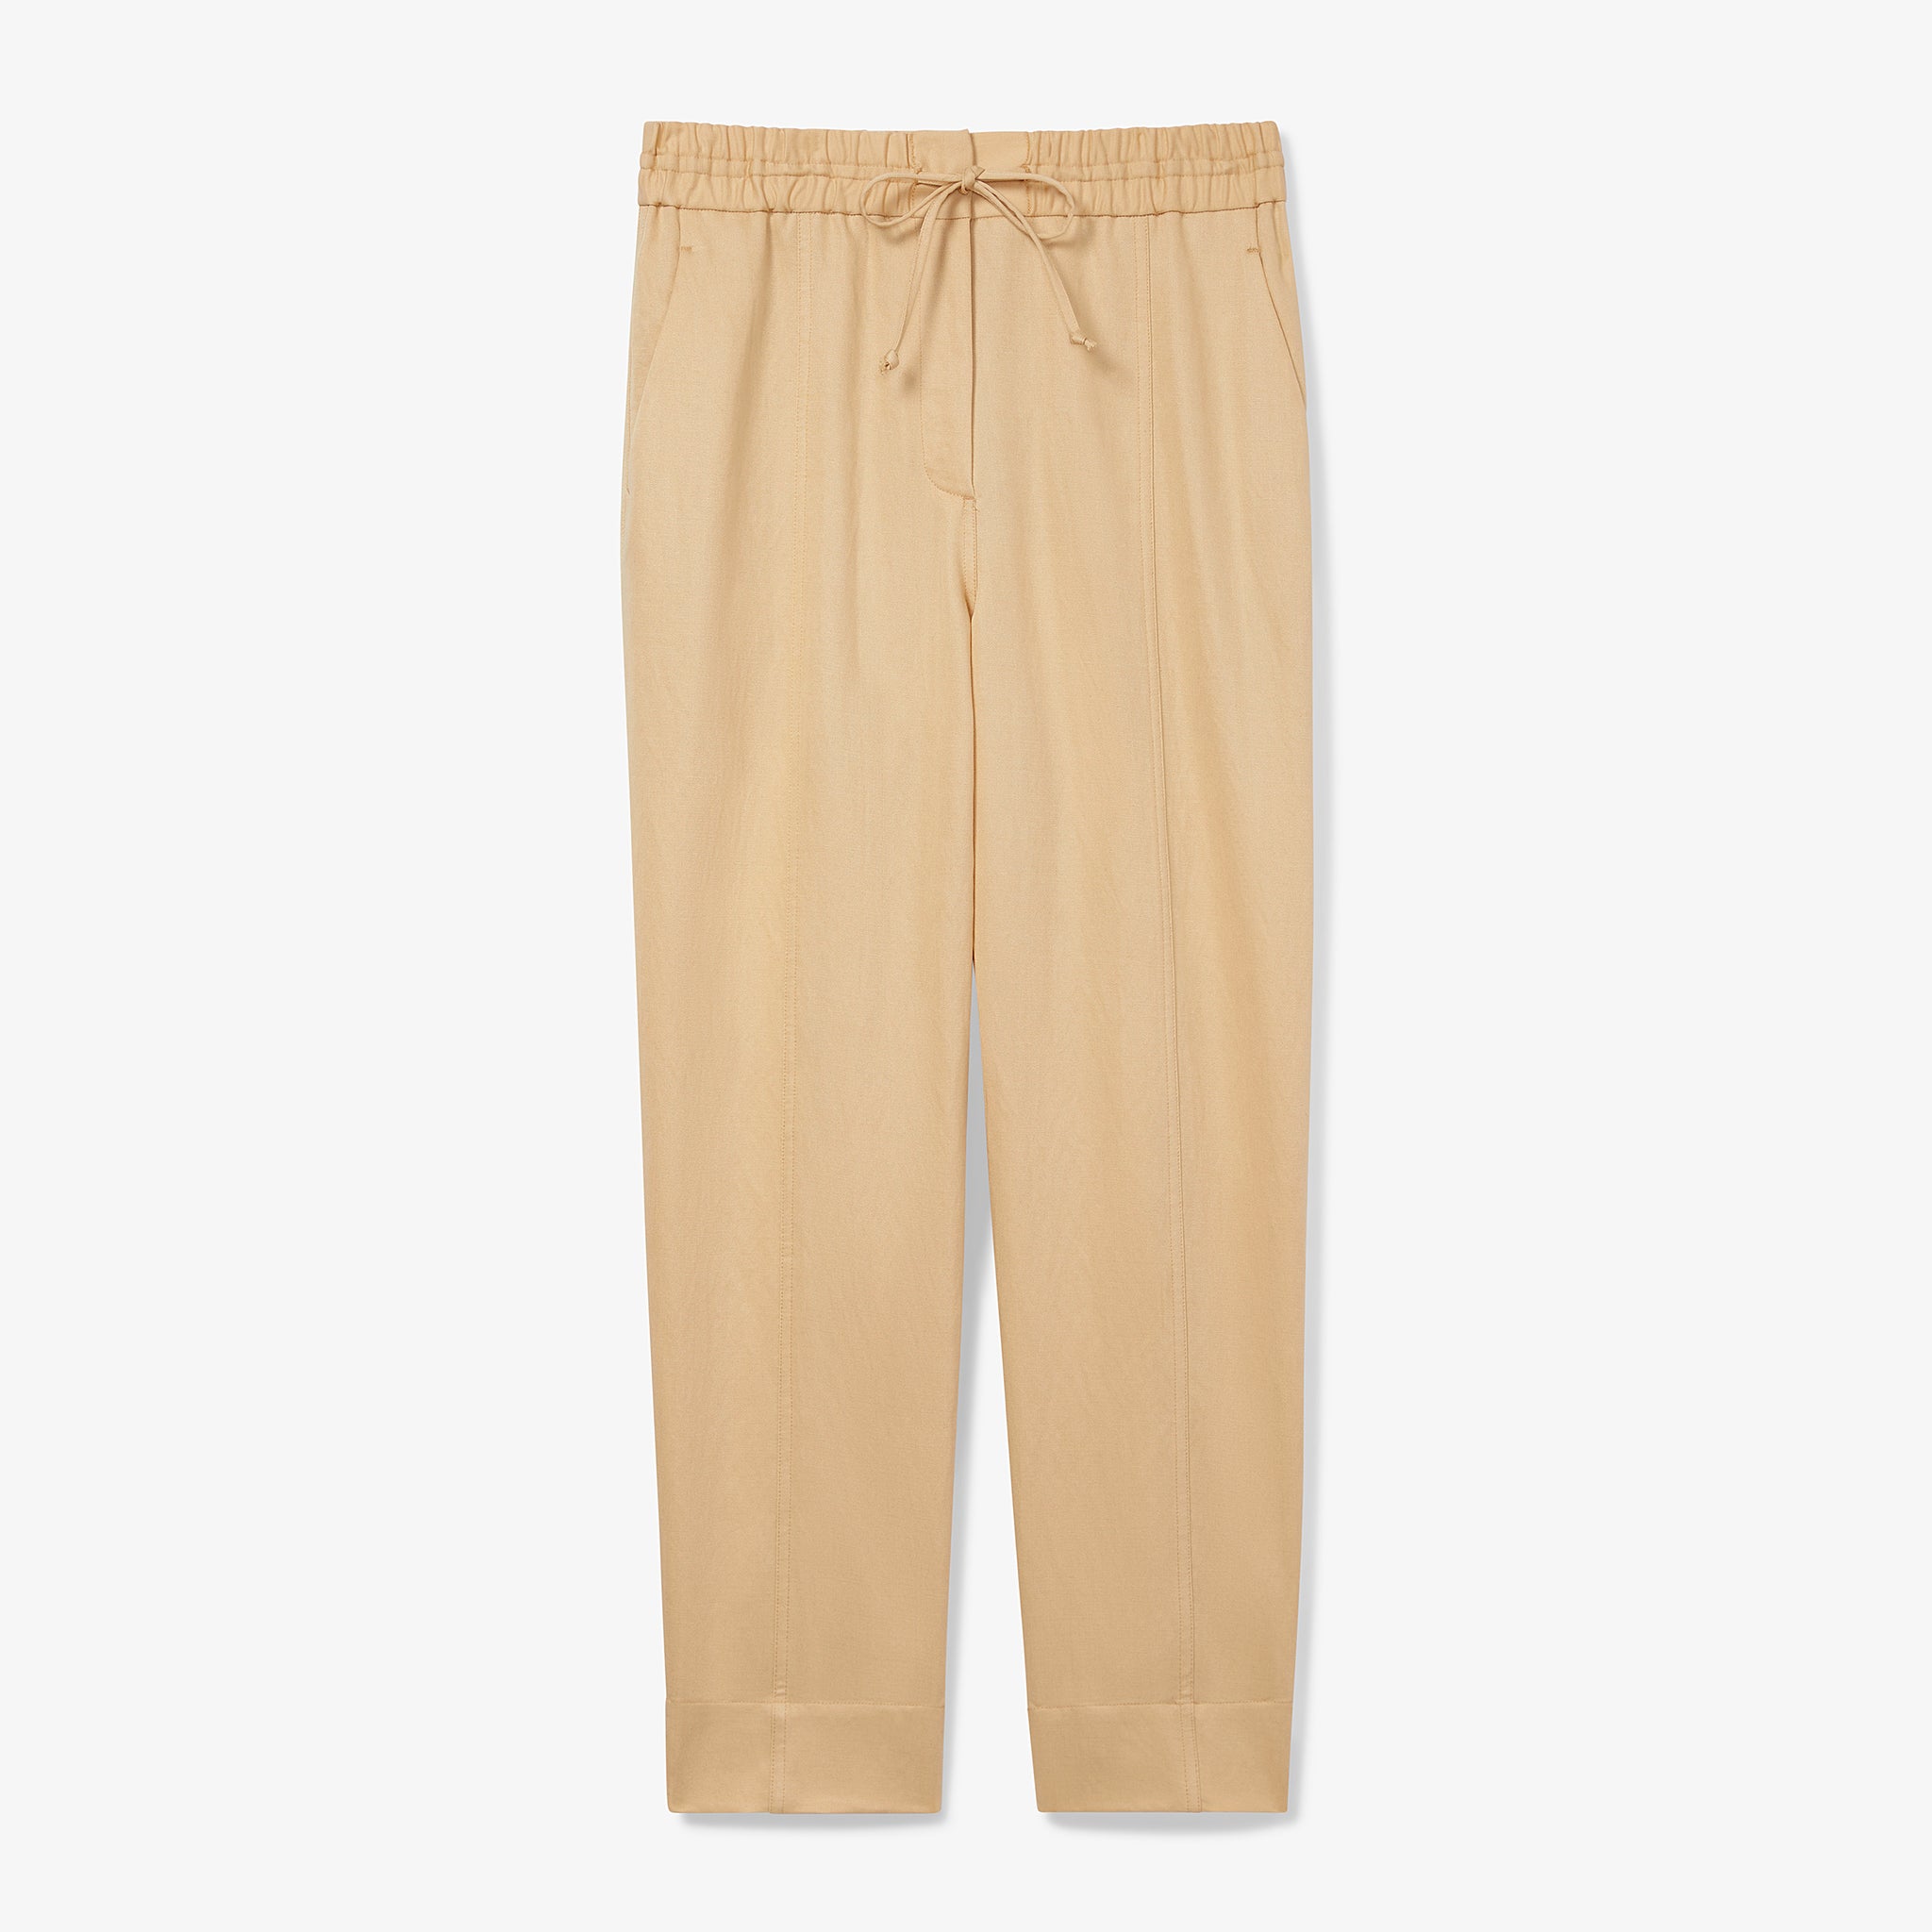 Packshot image of the Shane Pant - Everyday Twill in Butter